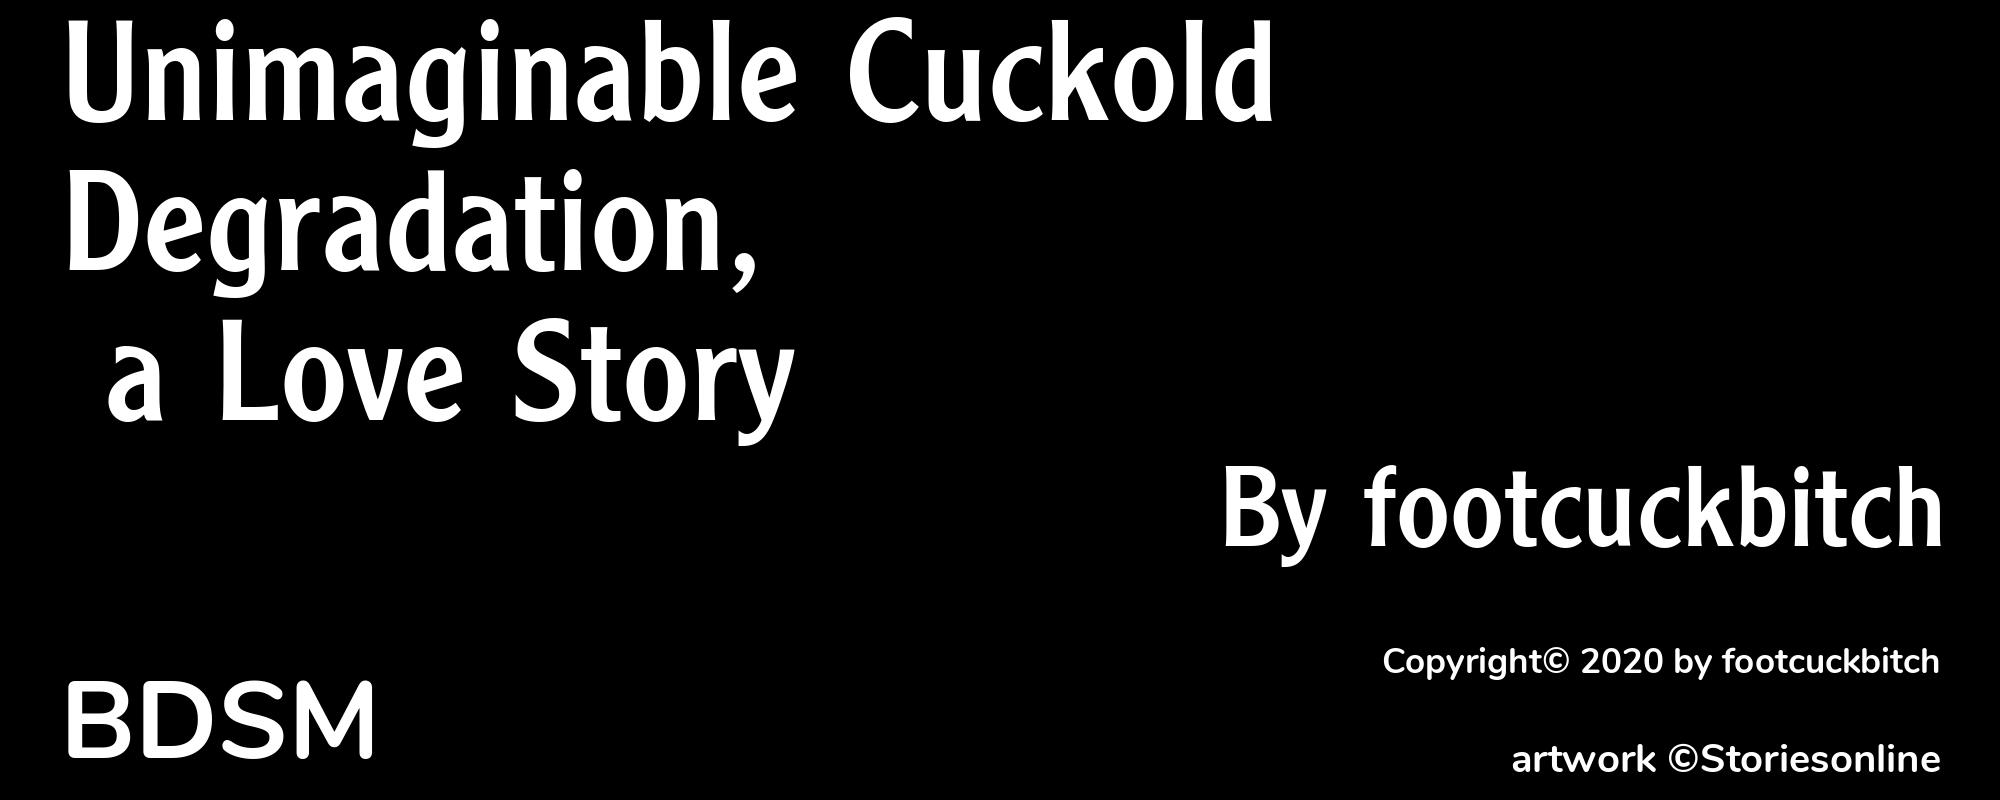 Unimaginable Cuckold Degradation, a Love Story - Cover